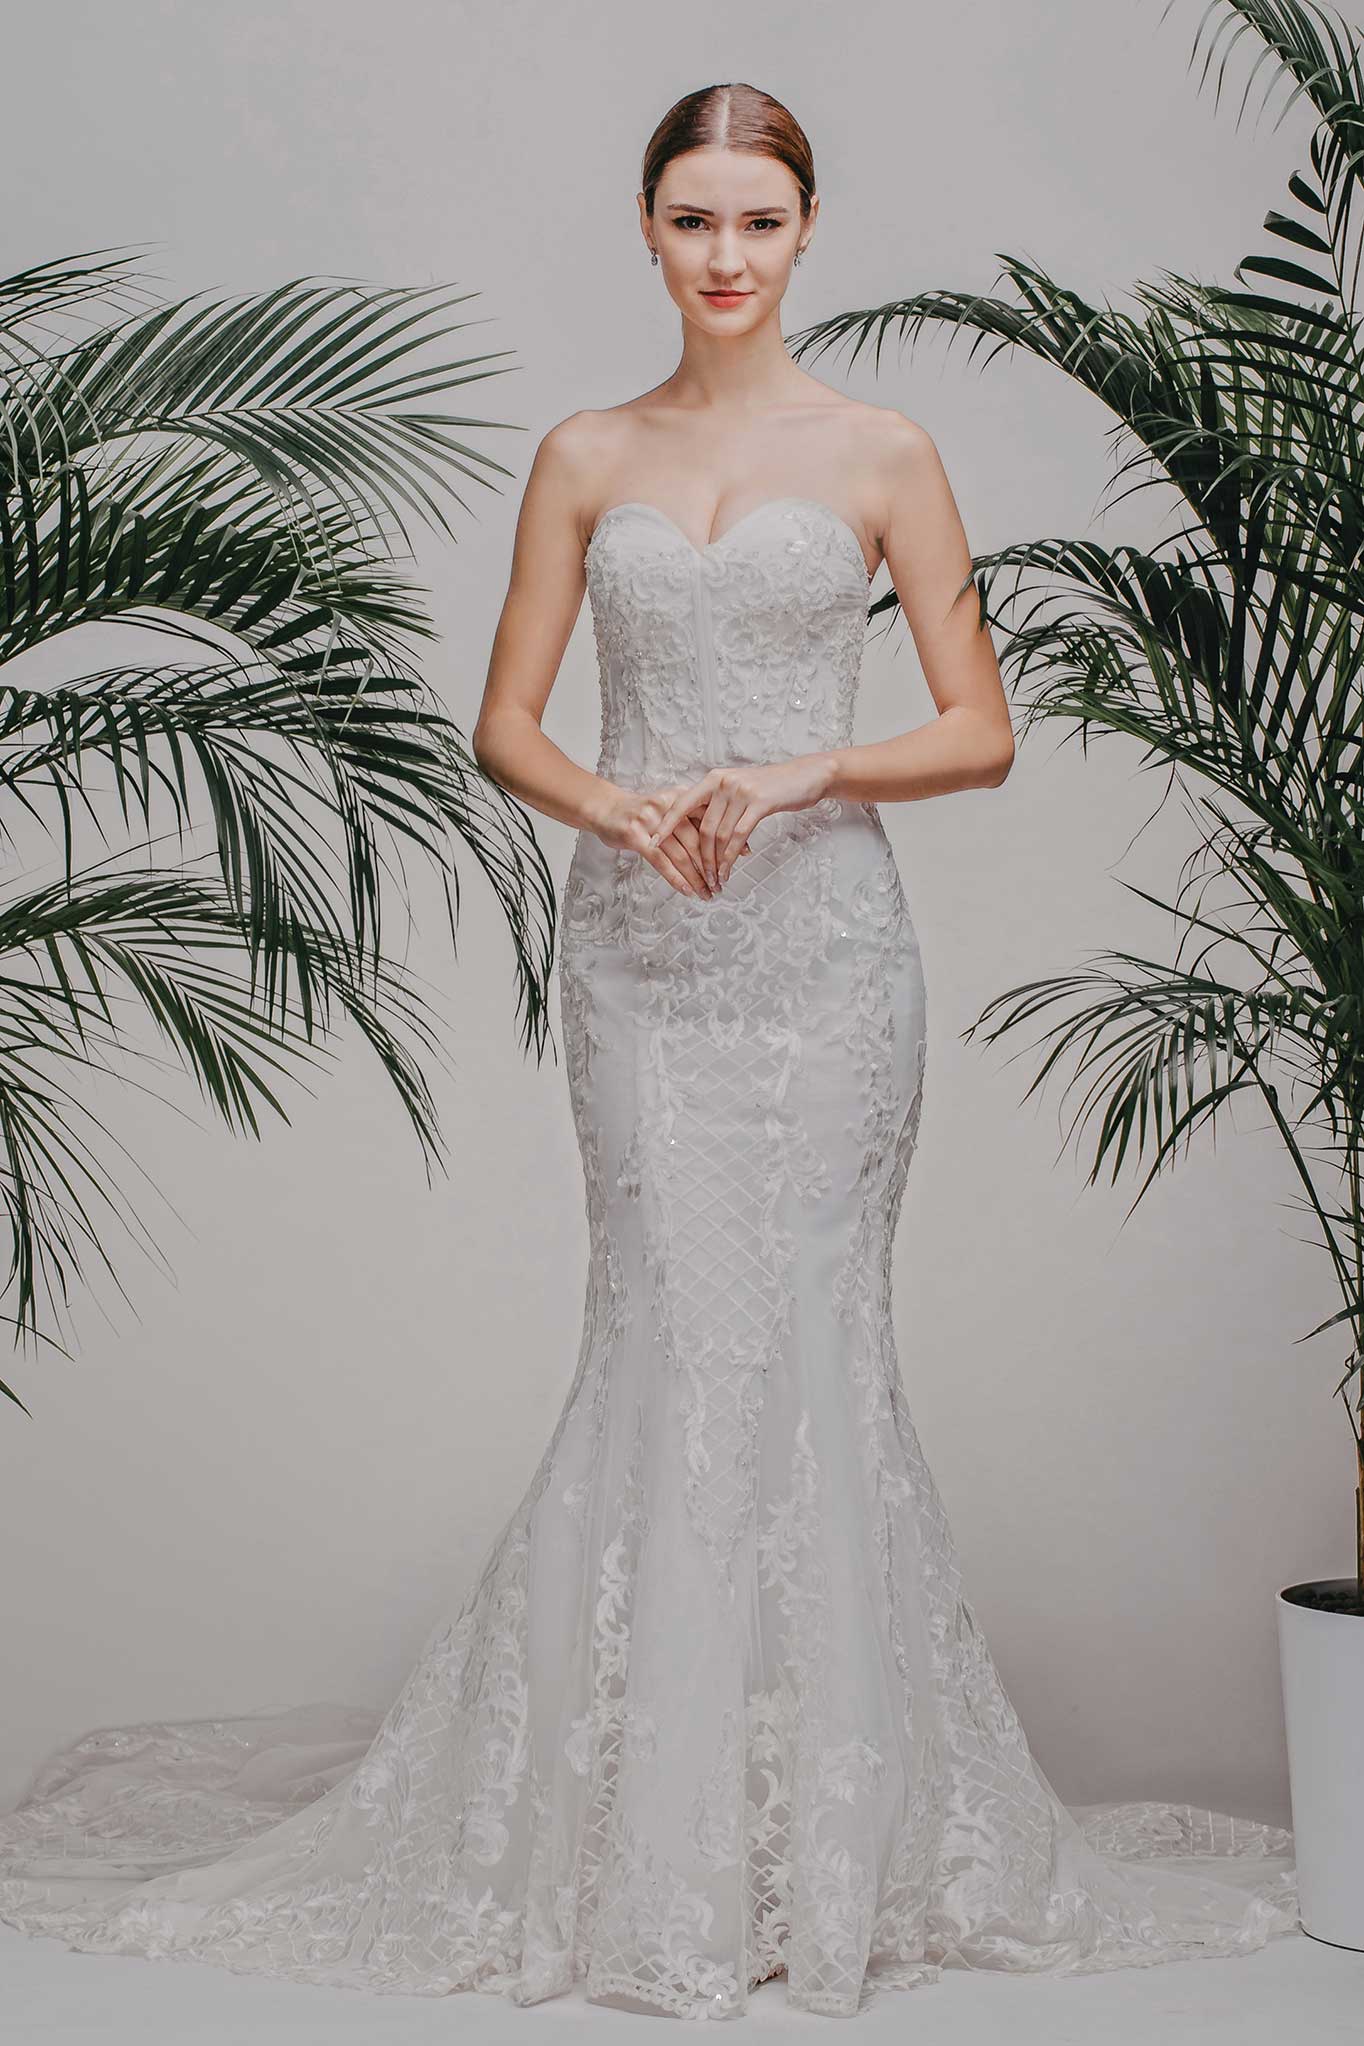 Odeliabridal-gown-collection-01_